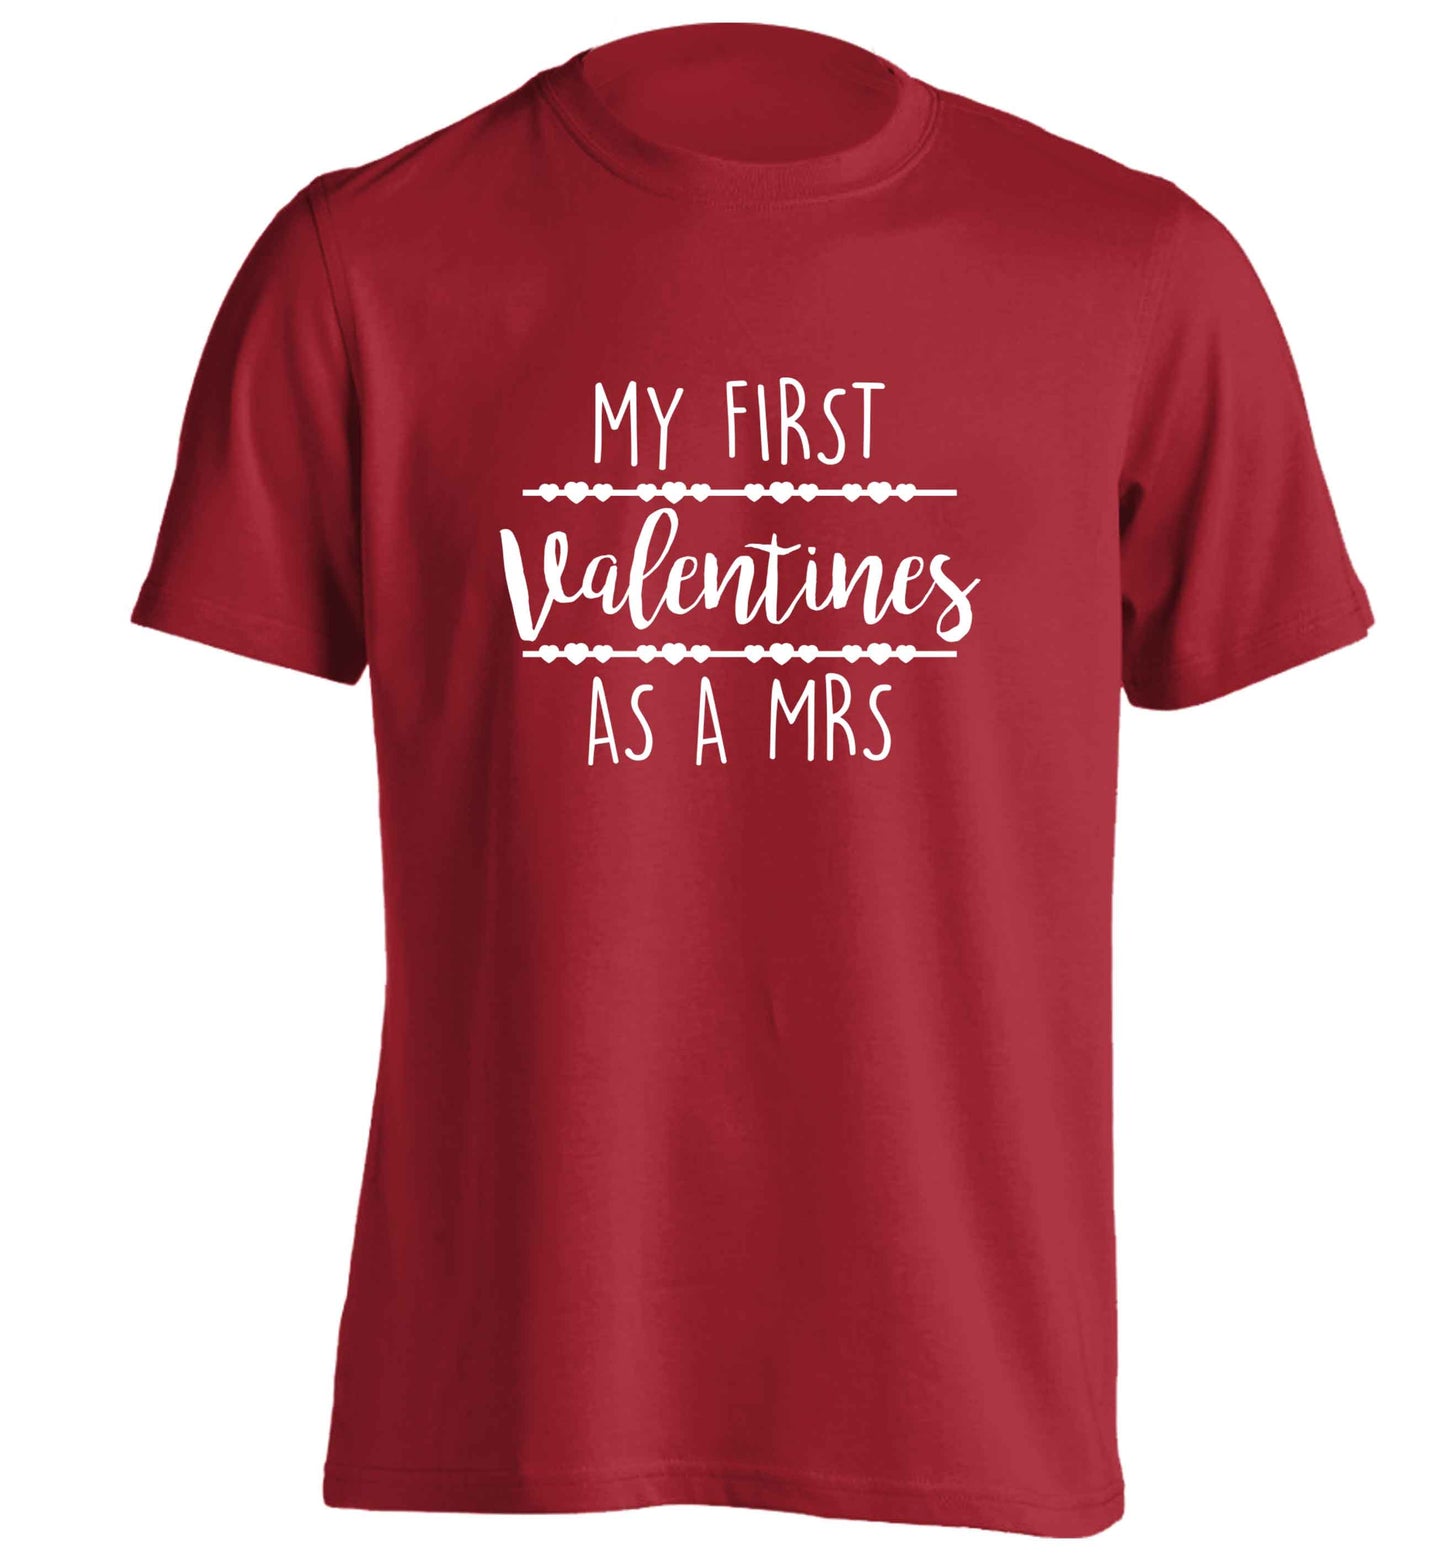 My first valentines as a Mrs adults unisex red Tshirt 2XL